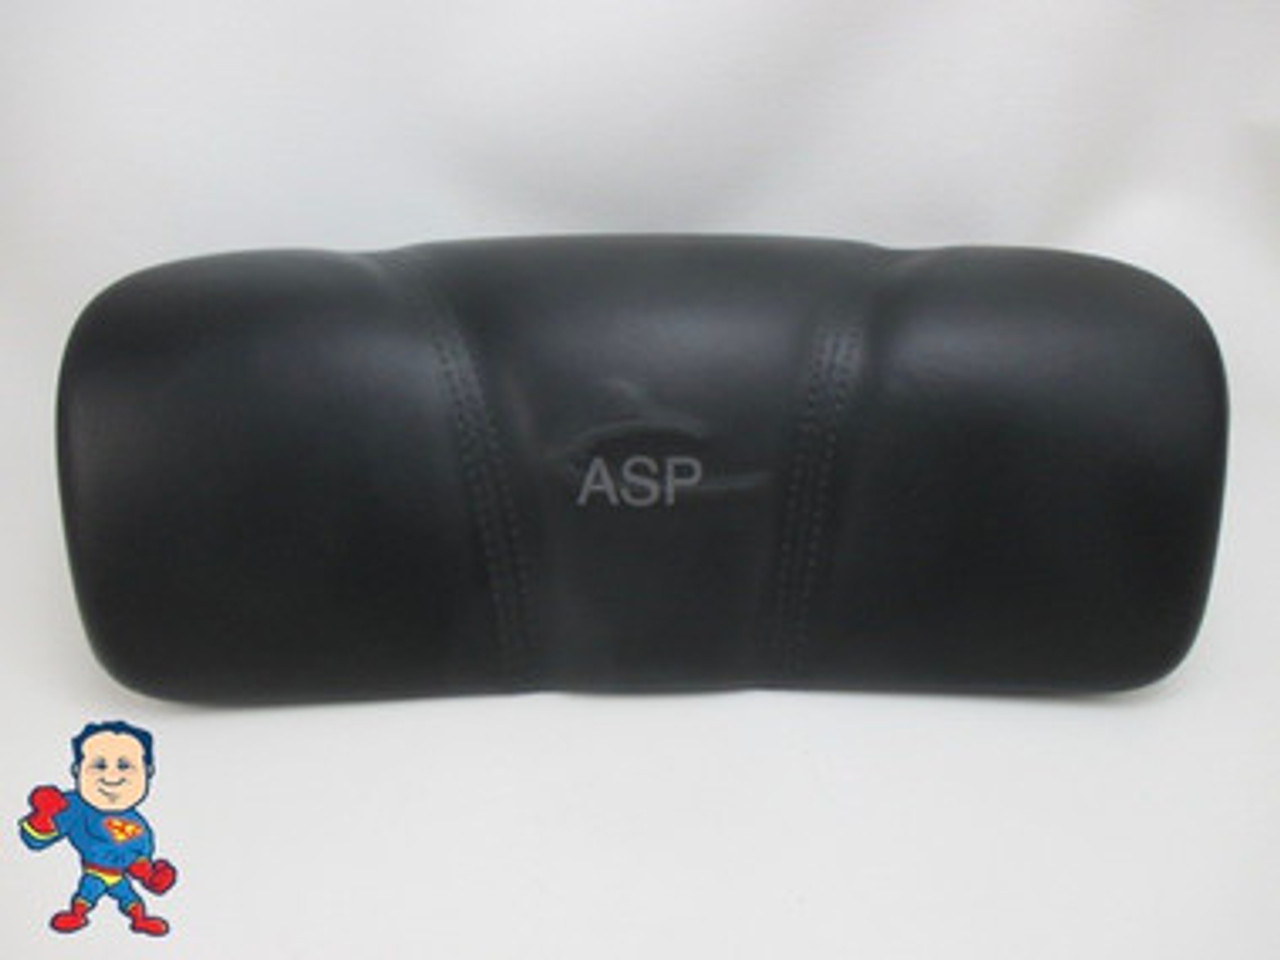 Dynasty Spa Hot Tub Neck Pillow Black Head Rest 2009 Stitched Pin 6 1/4 " Apart 1868